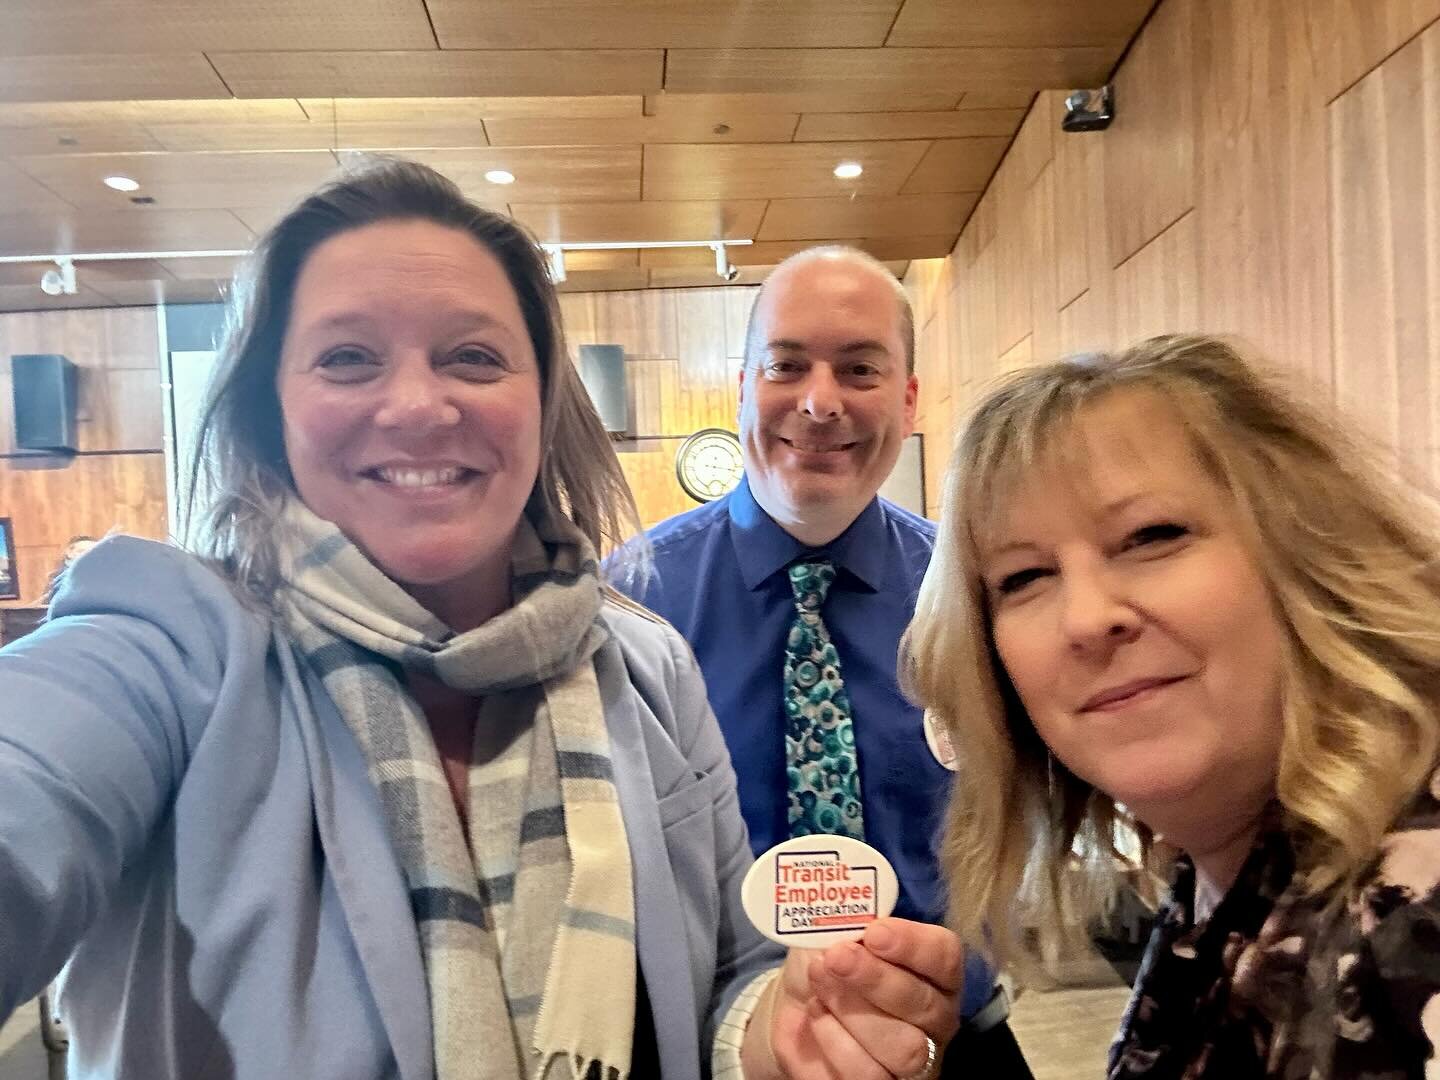 Got to spend the morning with Franklin Regional Transit Authority to celebrate National Transit Employee Appreciation Day! Thanks to everyone in the transit industry who gets us where we need to go.